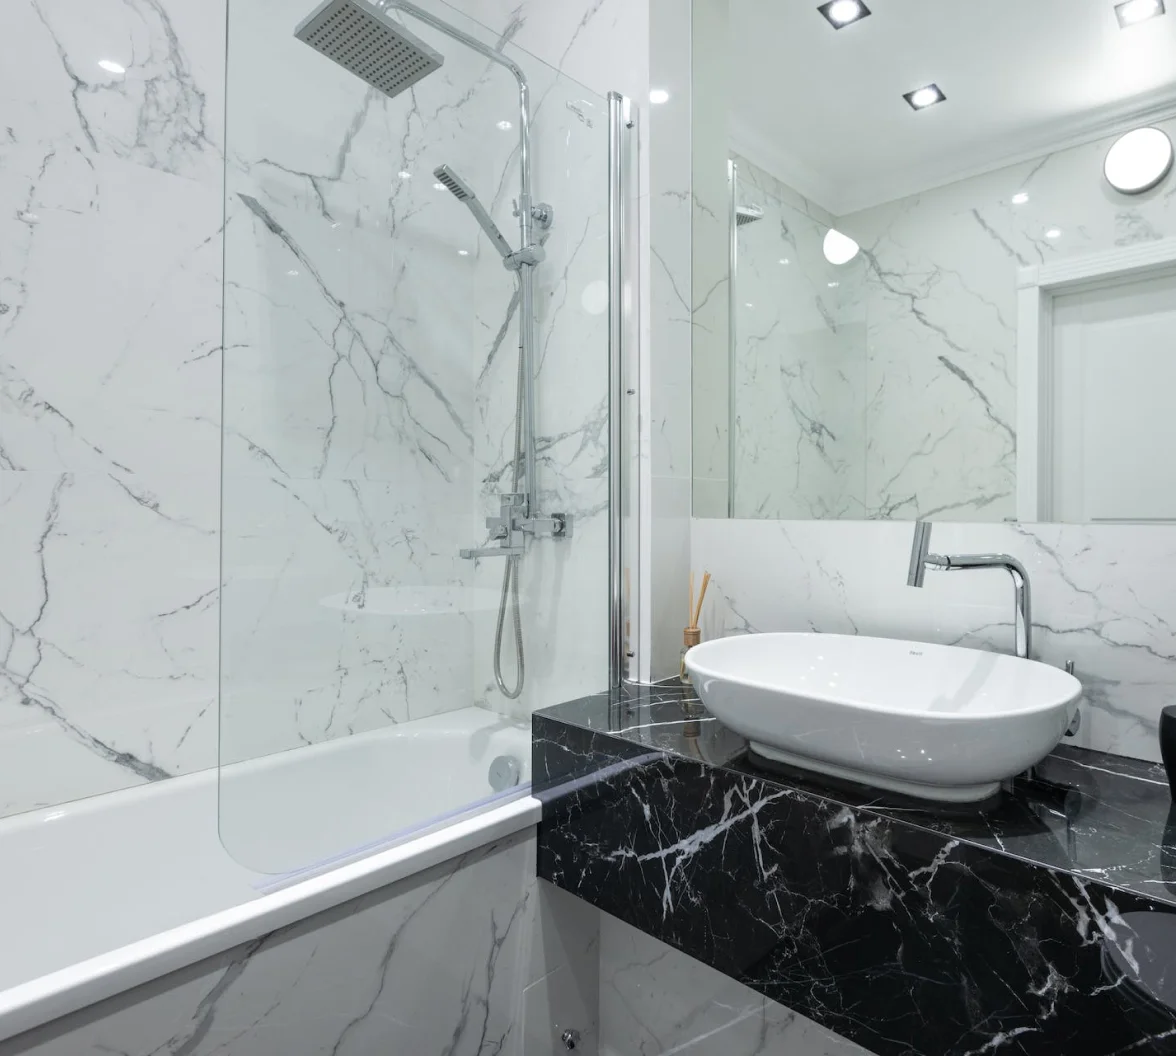 Bathroom remodeling services in Rice Lake, WI